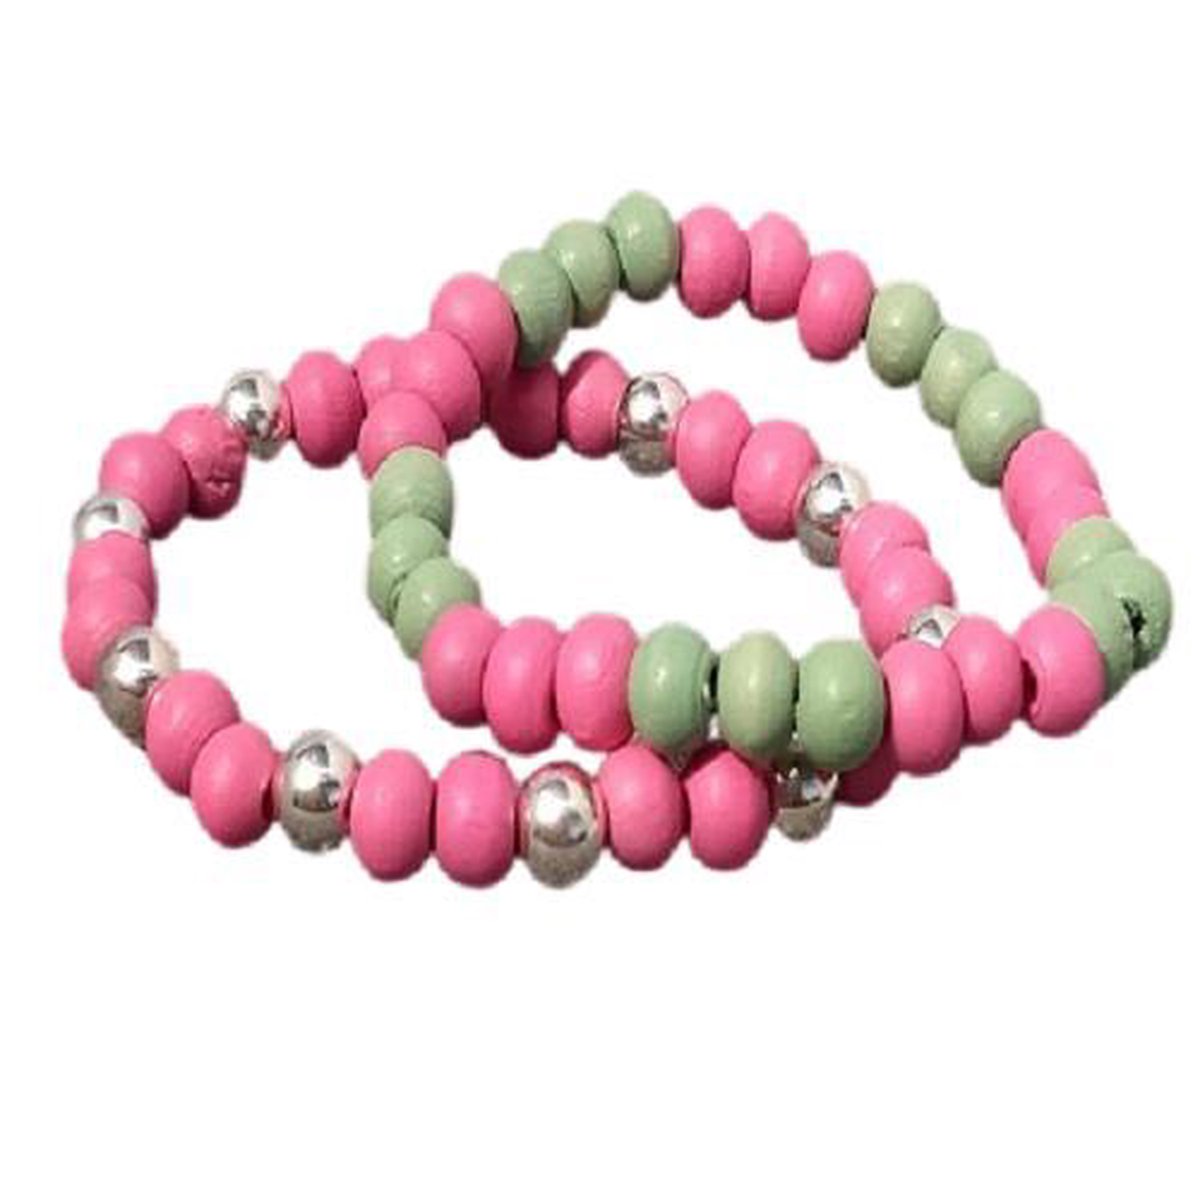 Little Bijoux armband-Beads Pink and green